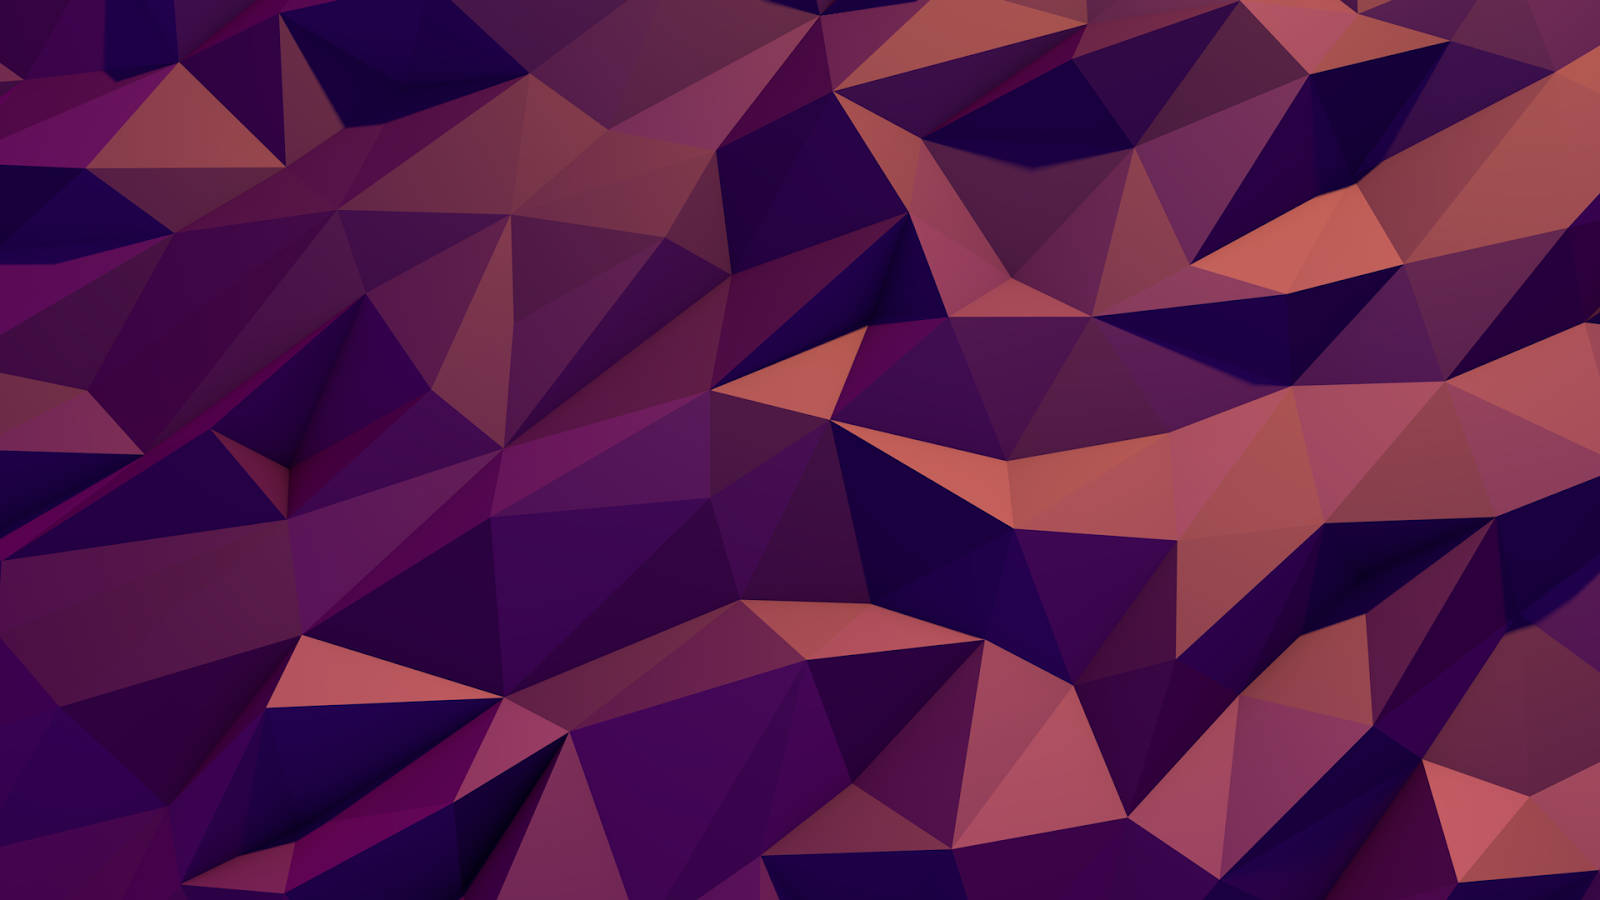 1600x900 Low Poly Wallpaper In 2020. Project Abstract, Low Poly, Tech Art Wallpaper